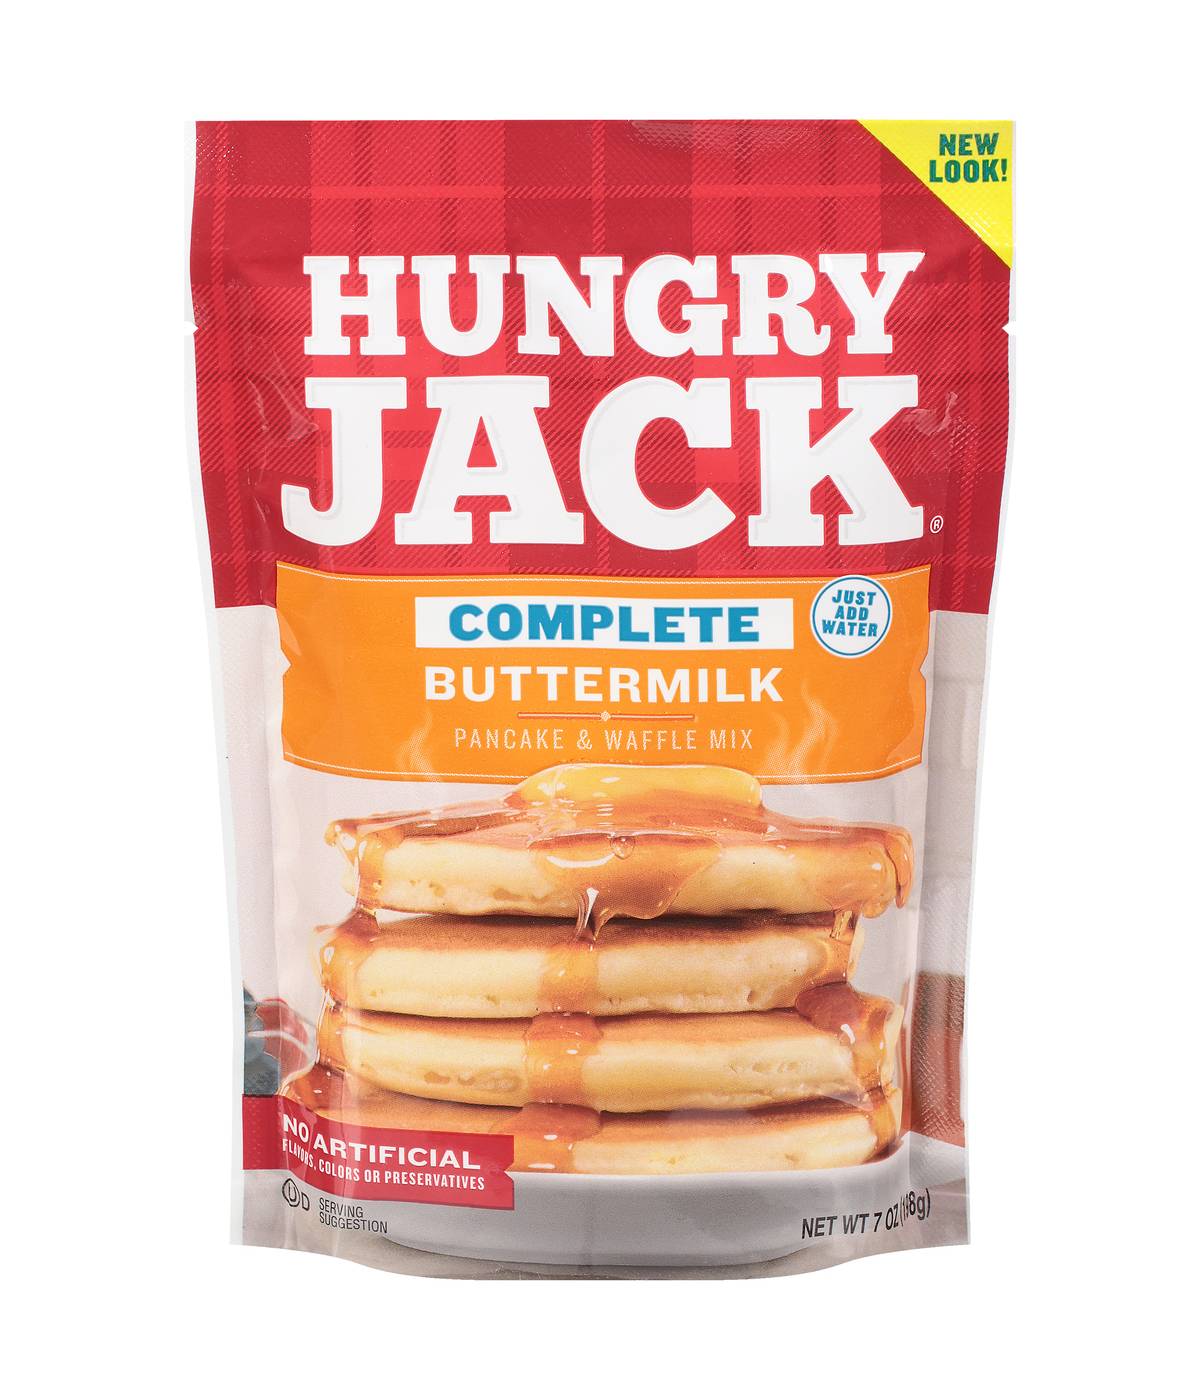 Hungry Jack Complete Buttermilk Pancake & Waffle Mix; image 1 of 4